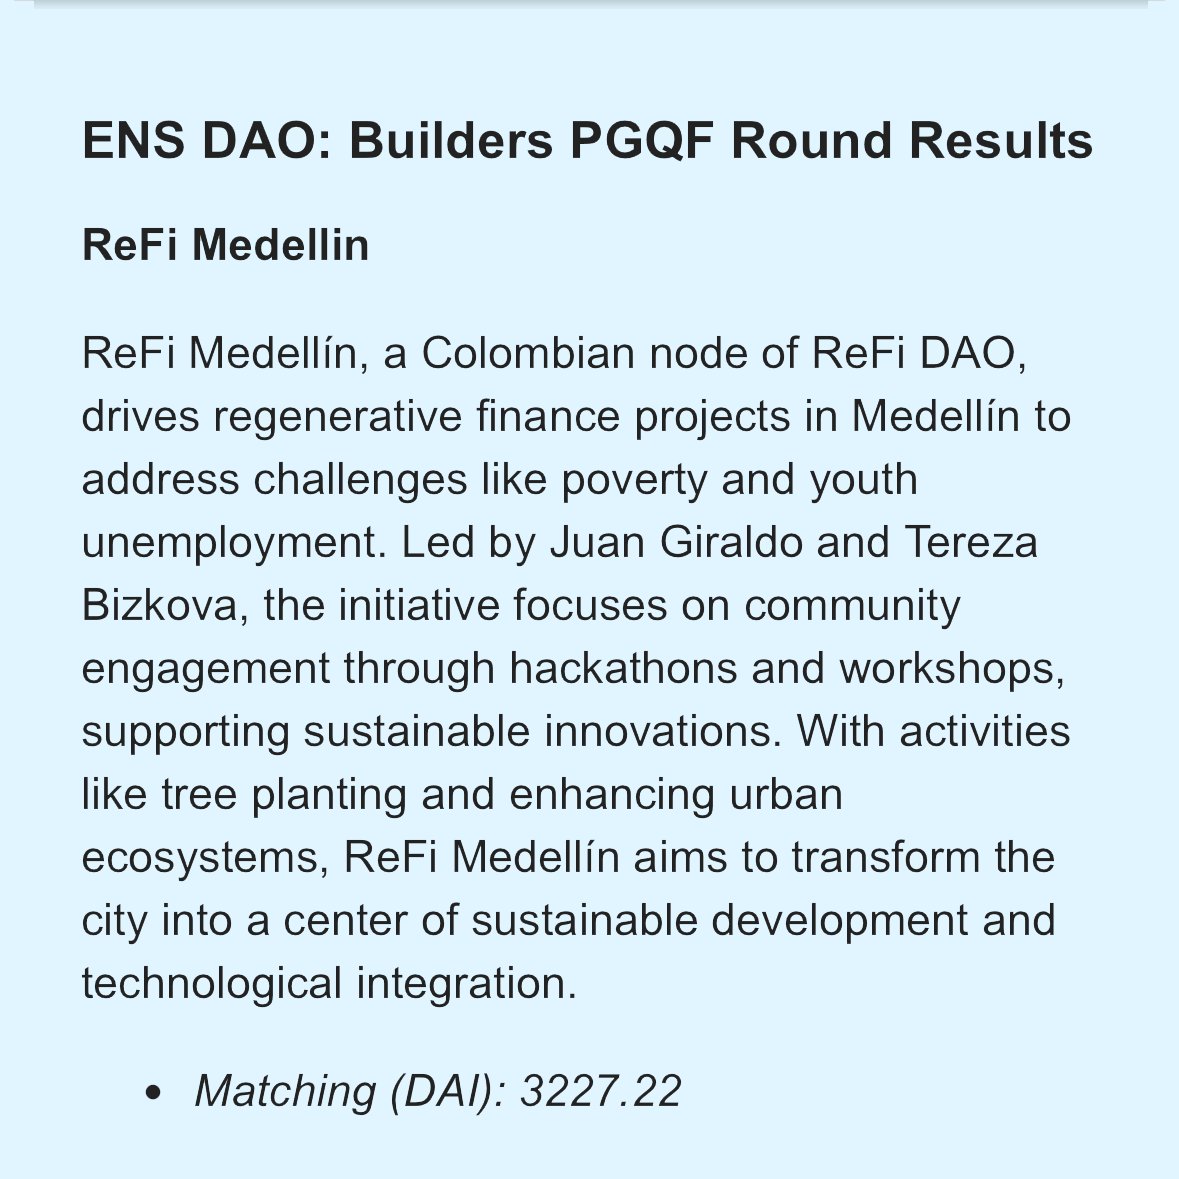 @ReFiDAOist ReFi Medellín focuses on regenerative finance in Colombia, engaging communities through hackathons and workshops, aiming to transform Medellín into a sustainable development hub.